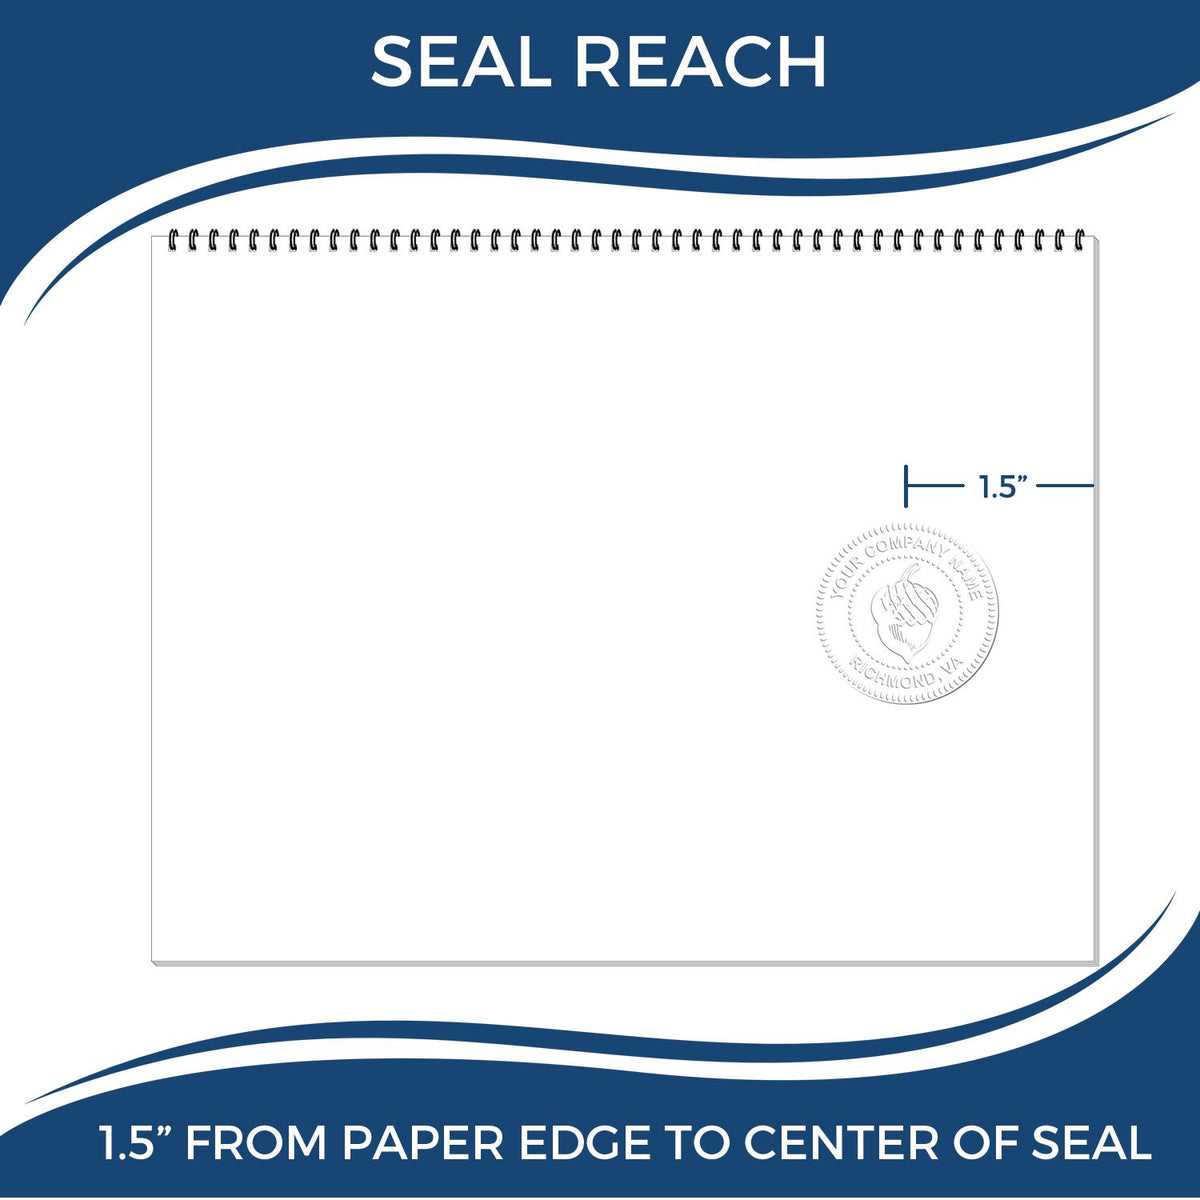 An infographic showing the seal reach which is represented by a ruler and a miniature seal image of the Hybrid Florida Land Surveyor Seal